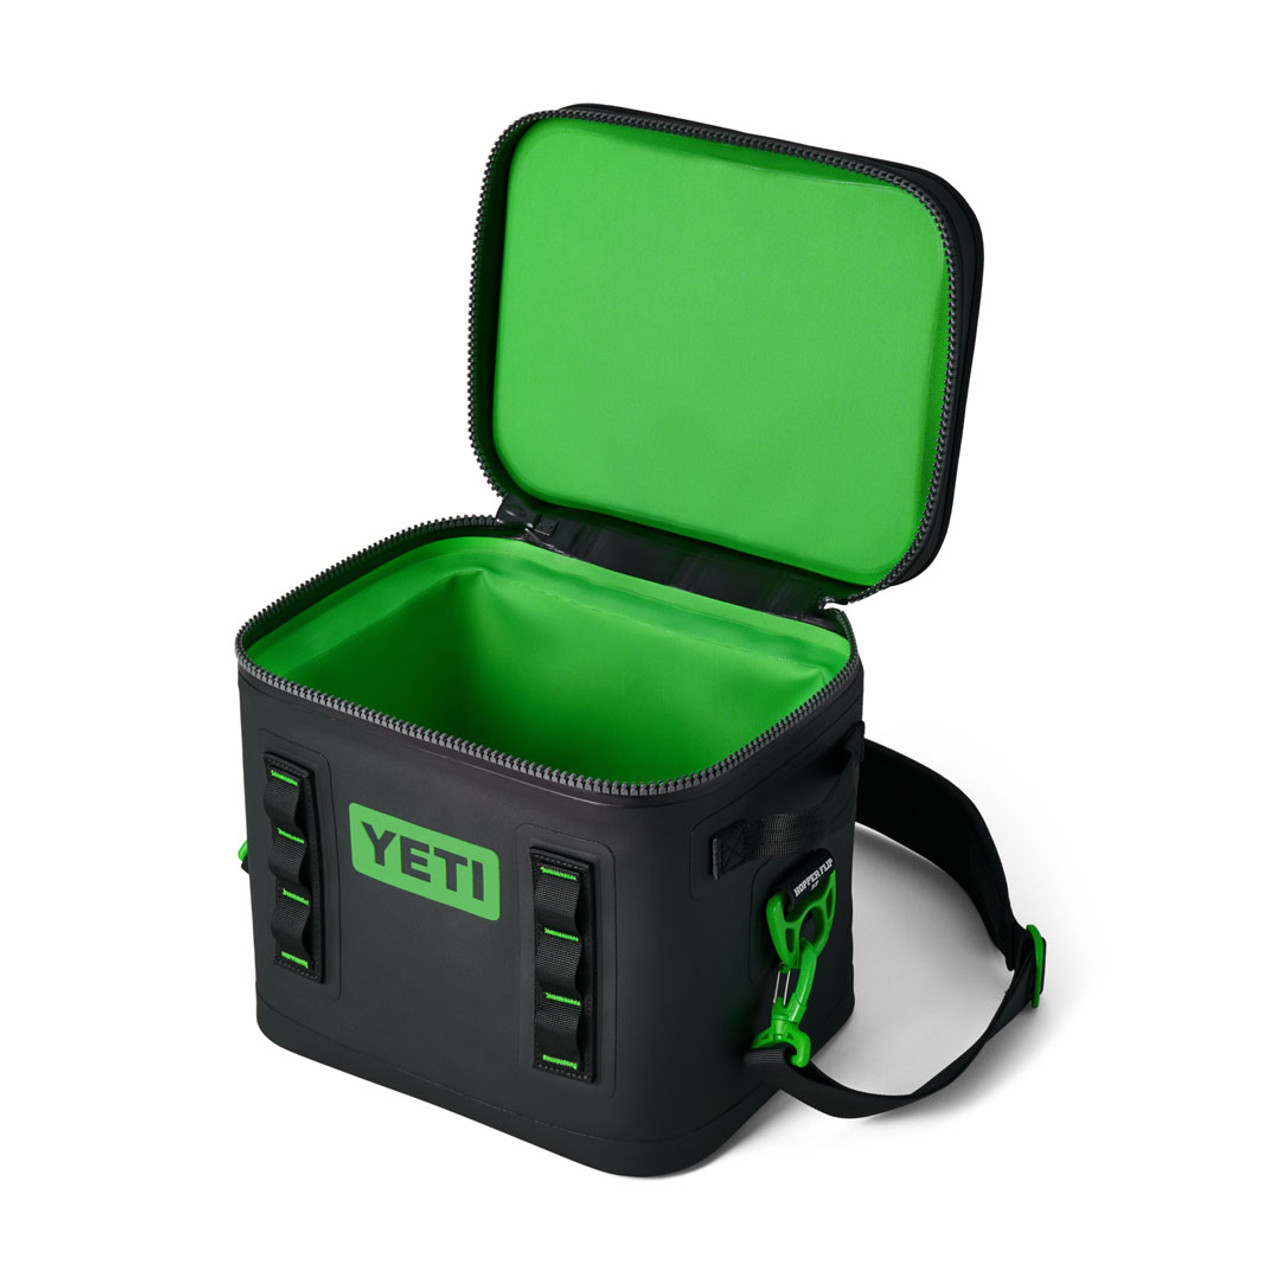 https://cdn11.bigcommerce.com/s-ppsyskcavg/images/stencil/1280x1280/products/64640/230069/W-site_studio_Soft_Coolers_Hopper_Flip_12_Canopy_Green_3qtr_Open_10819_Primary_B_2400x2400__81501.1678377683.jpg?c=2?imbypass=on